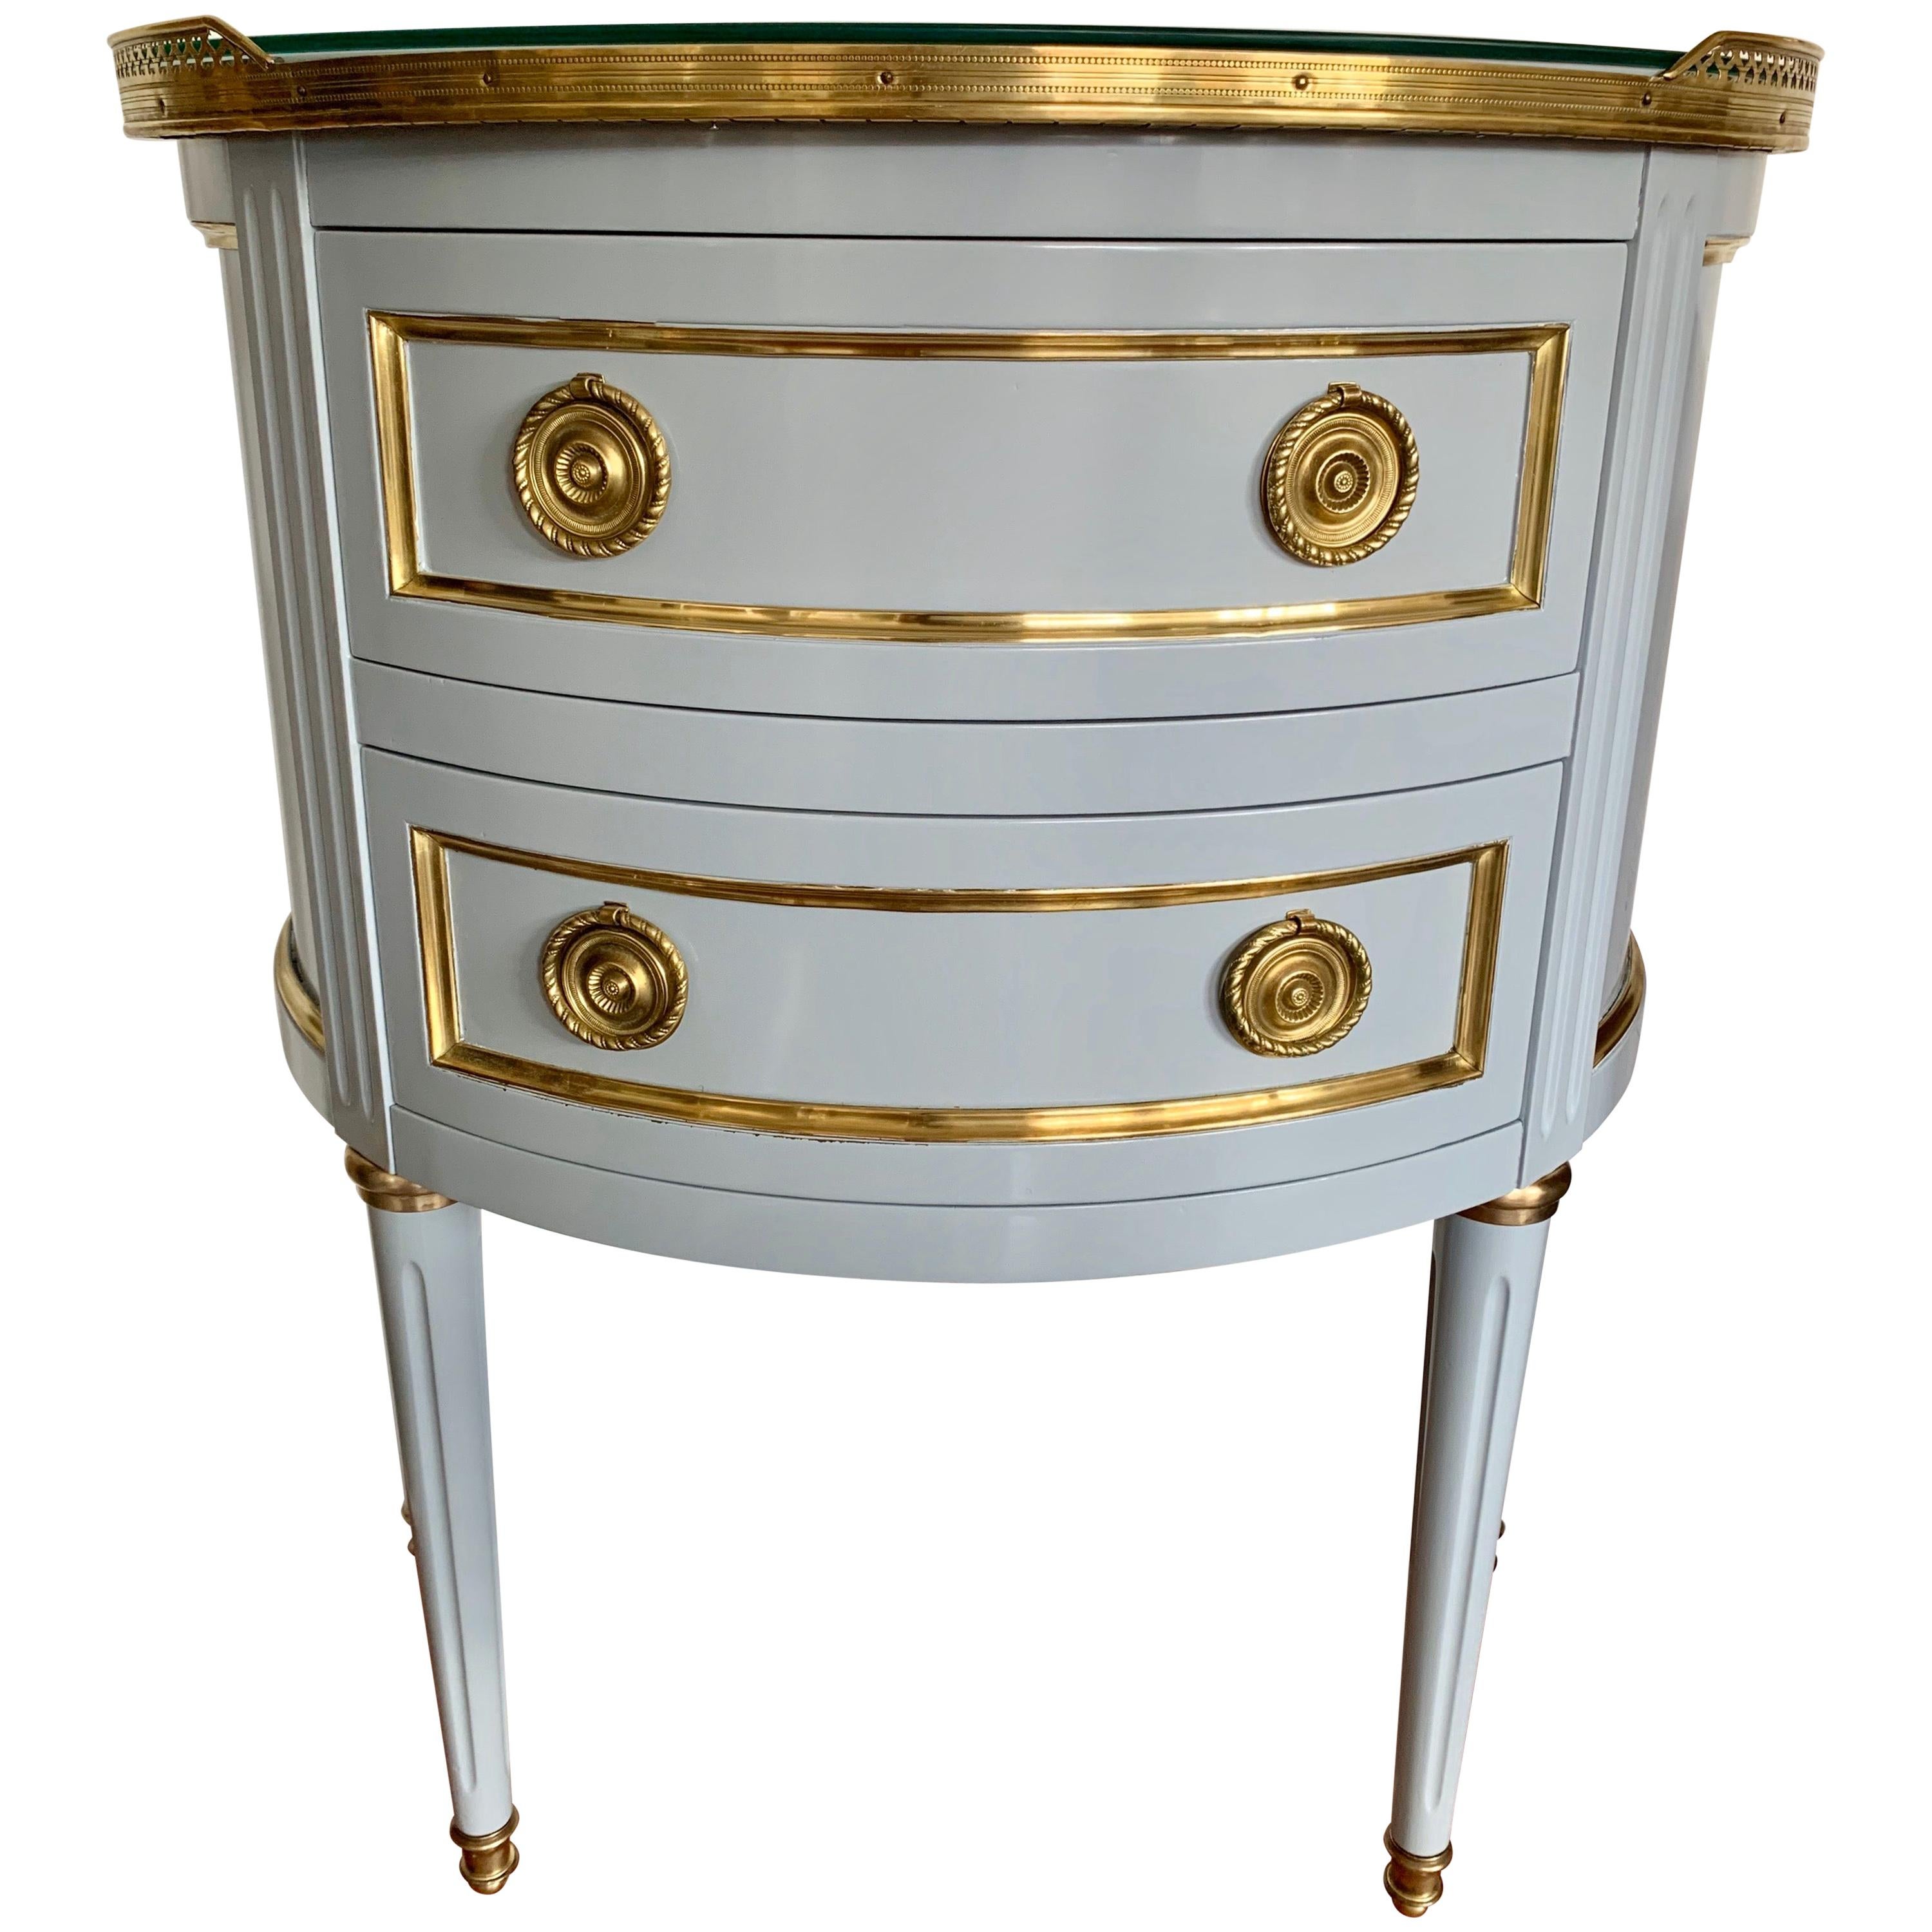 Ritz Carlton Newly Lacquered in Powder Blue with Brass Accents Demilune Chest